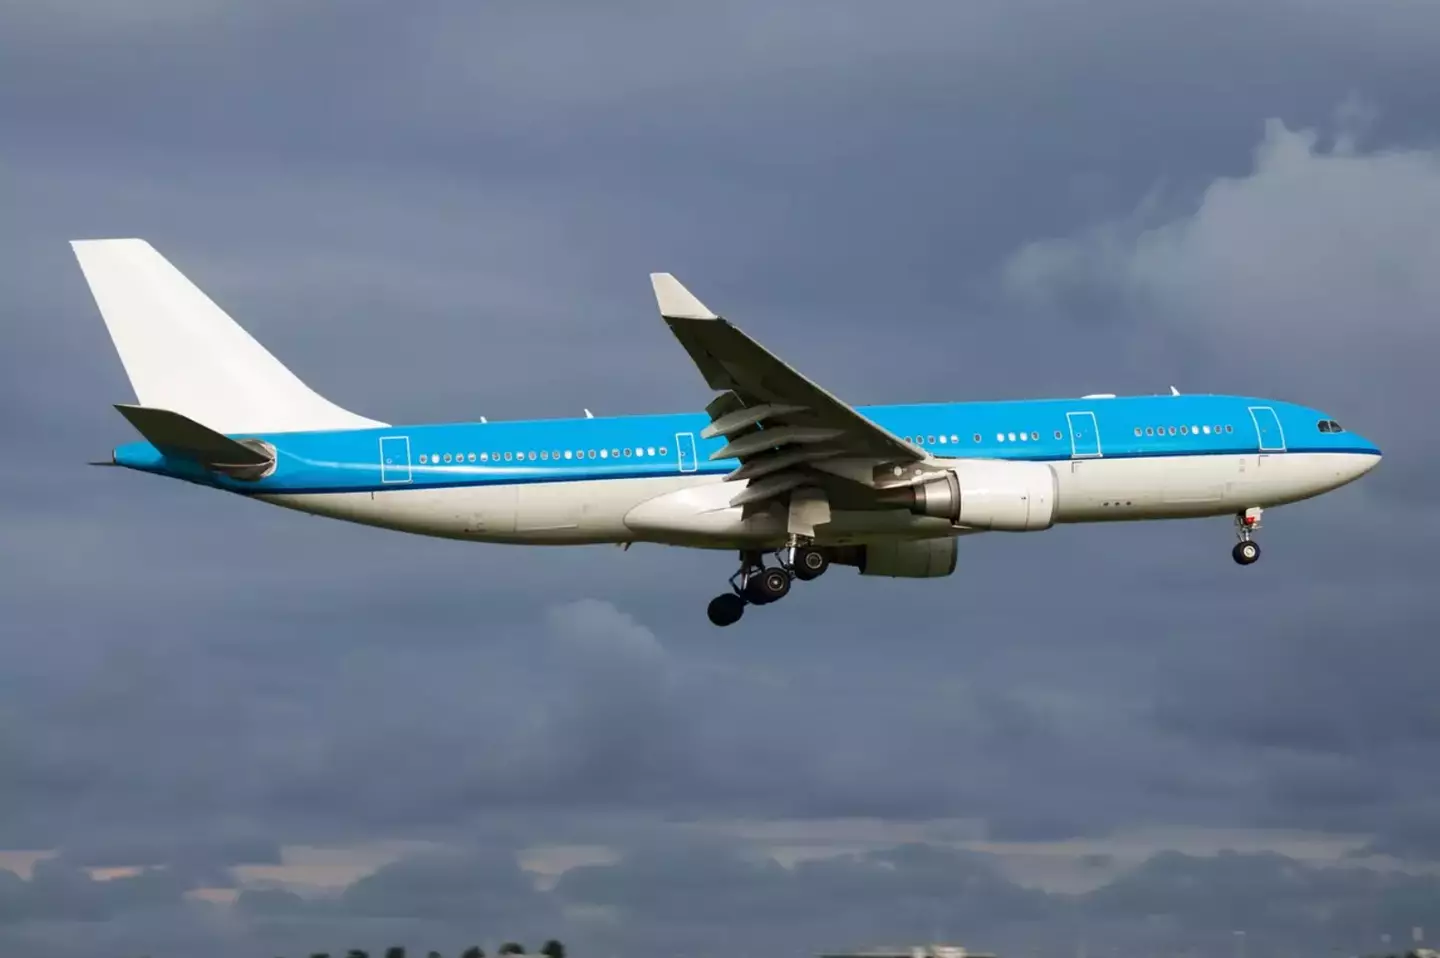 There have been safety concerns regarding the Boeing 787 Dreamliner in particular.